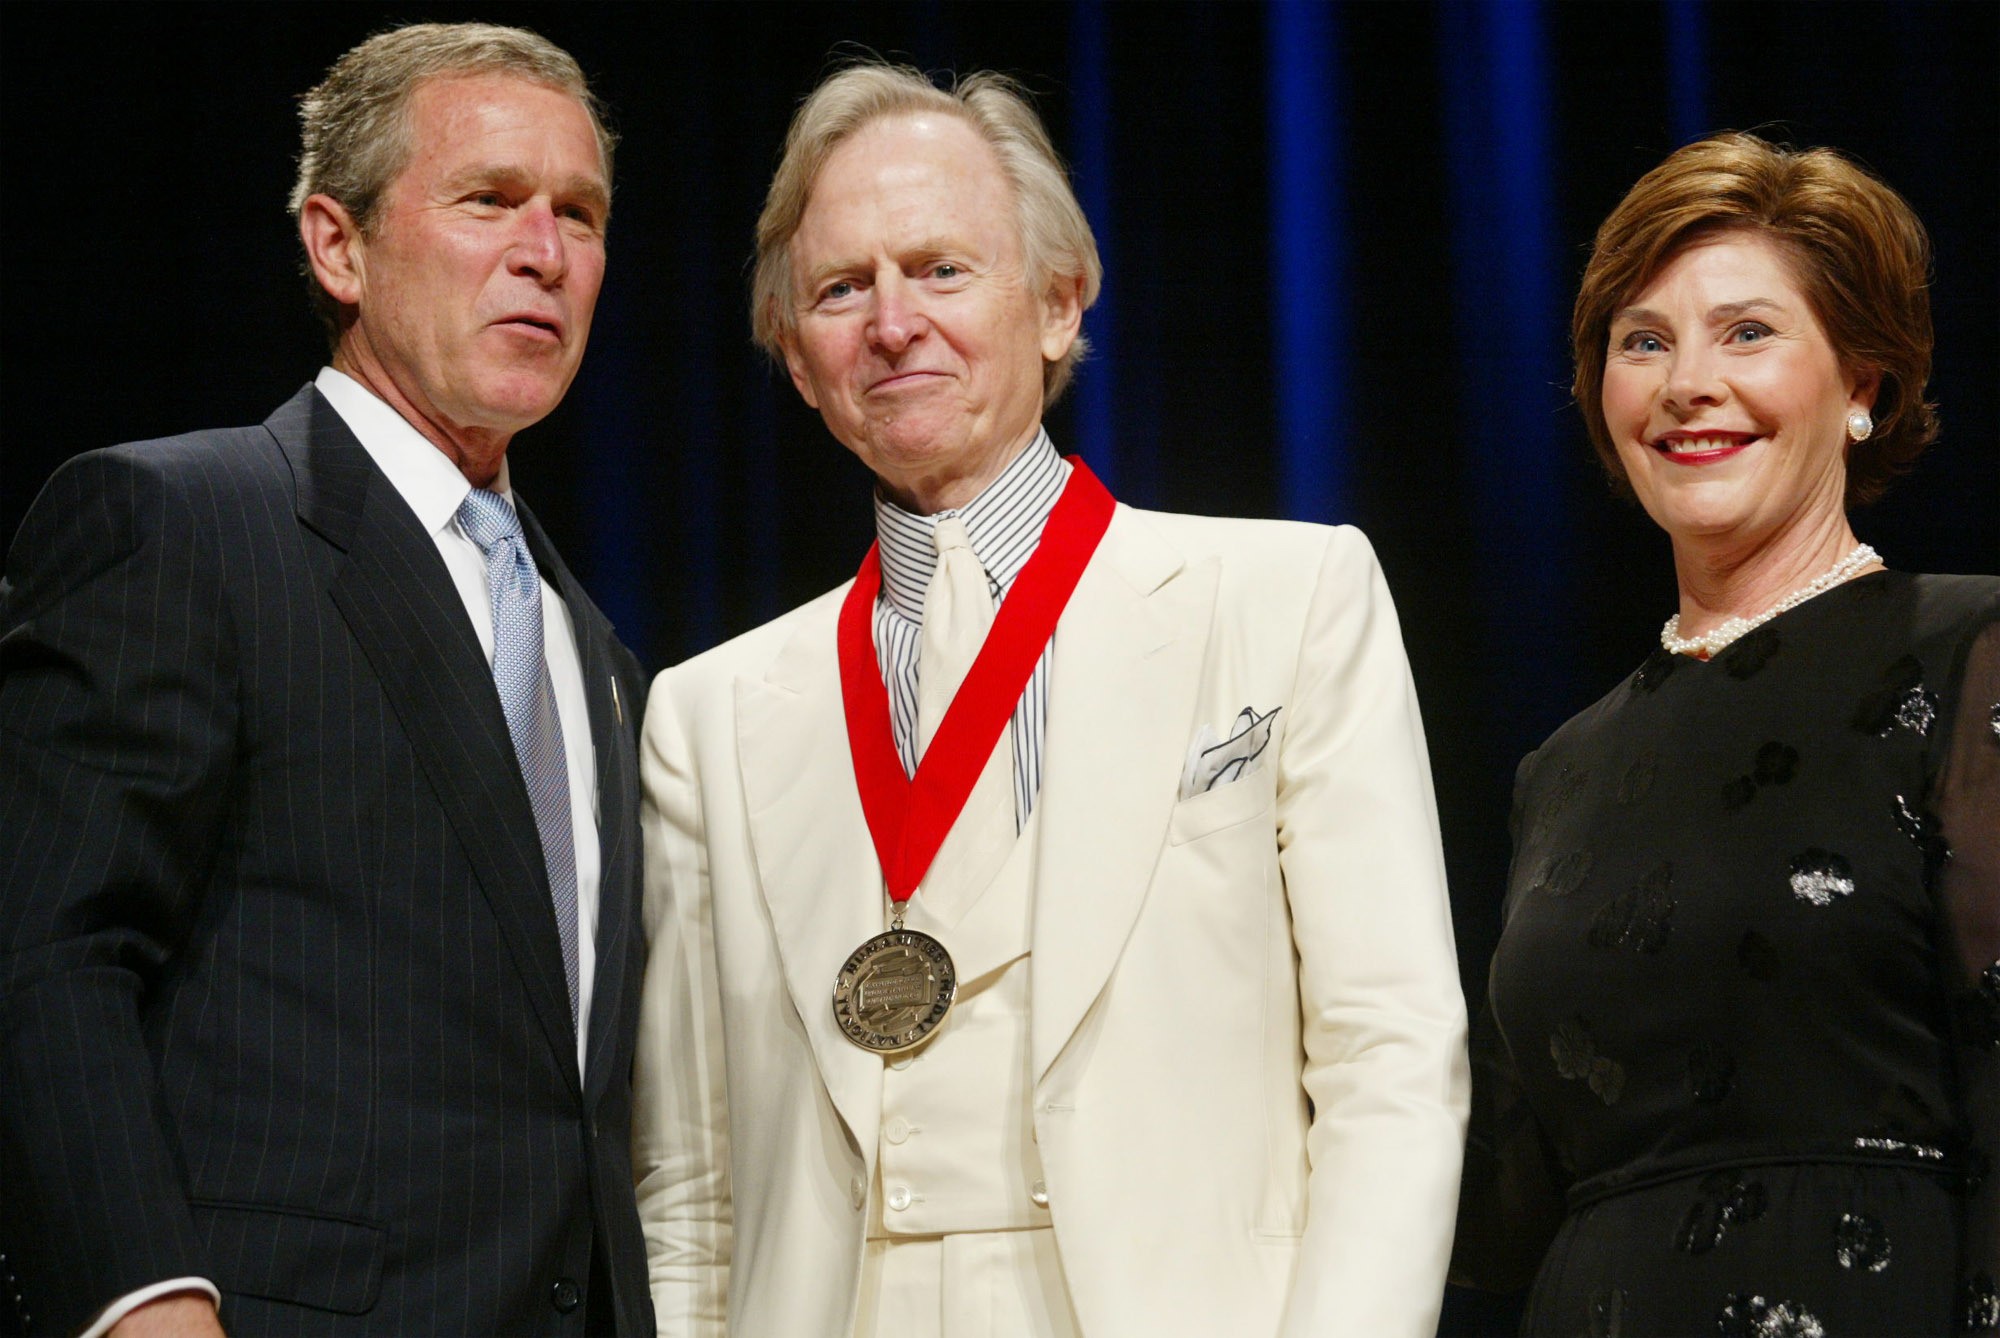 Author Tom Wolfe poses with then-president George W. Bush, and first lady Laura Bush during the National Endowment for the Arts National Medal Awards ceremony at Constitution Hall in Washington in 2002, where Wolfe was a recipient of the National Humanities Medal. Photo: AP 